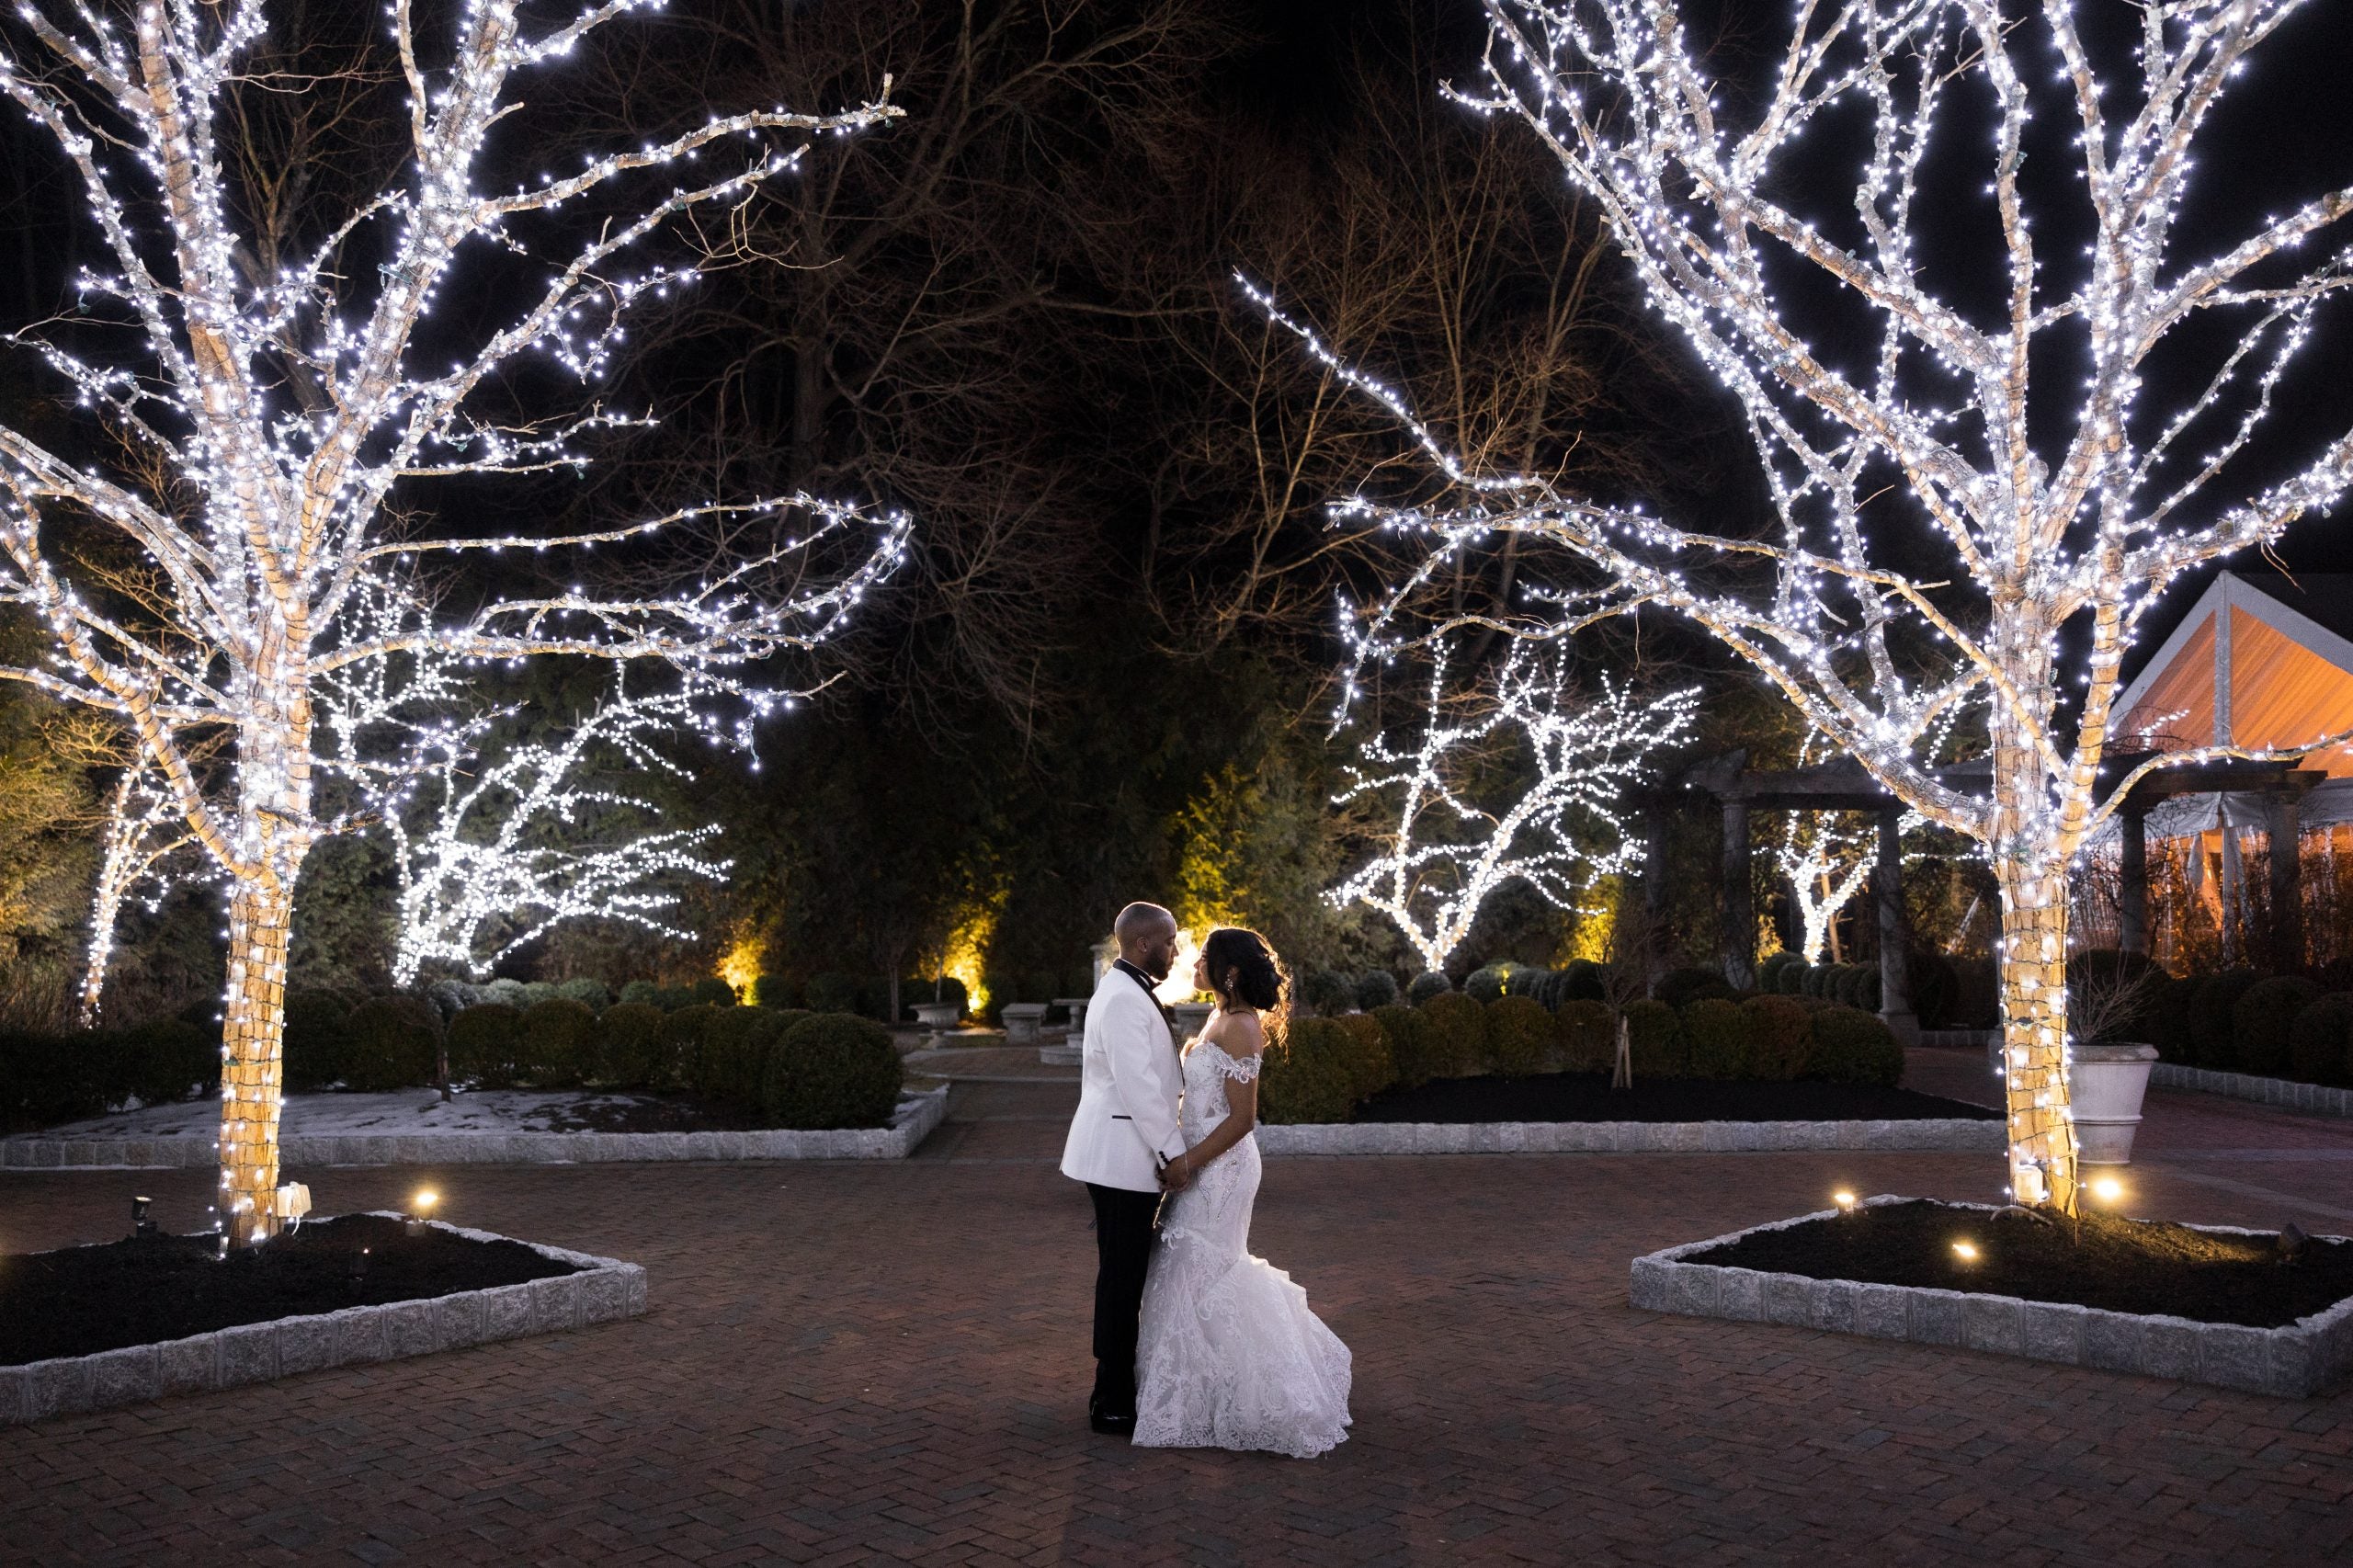 Bridal Bliss: Erica And Kaalen's New Jersey Nuptials Were Nothing Short Of Magical